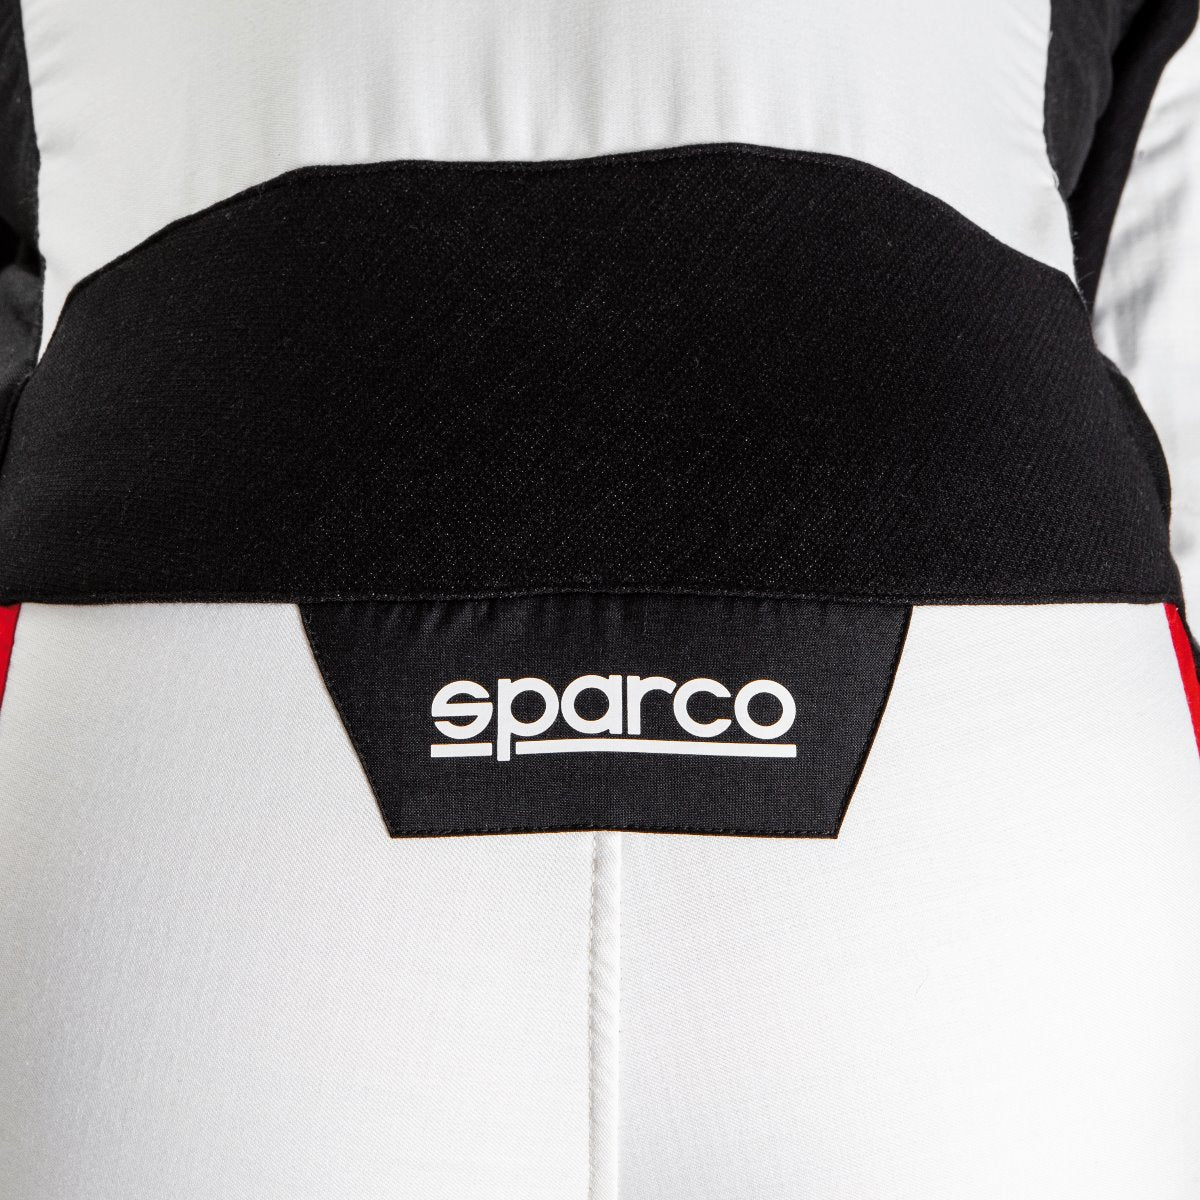 Sparco Victory Fire Suit 8856-2000 Back Image